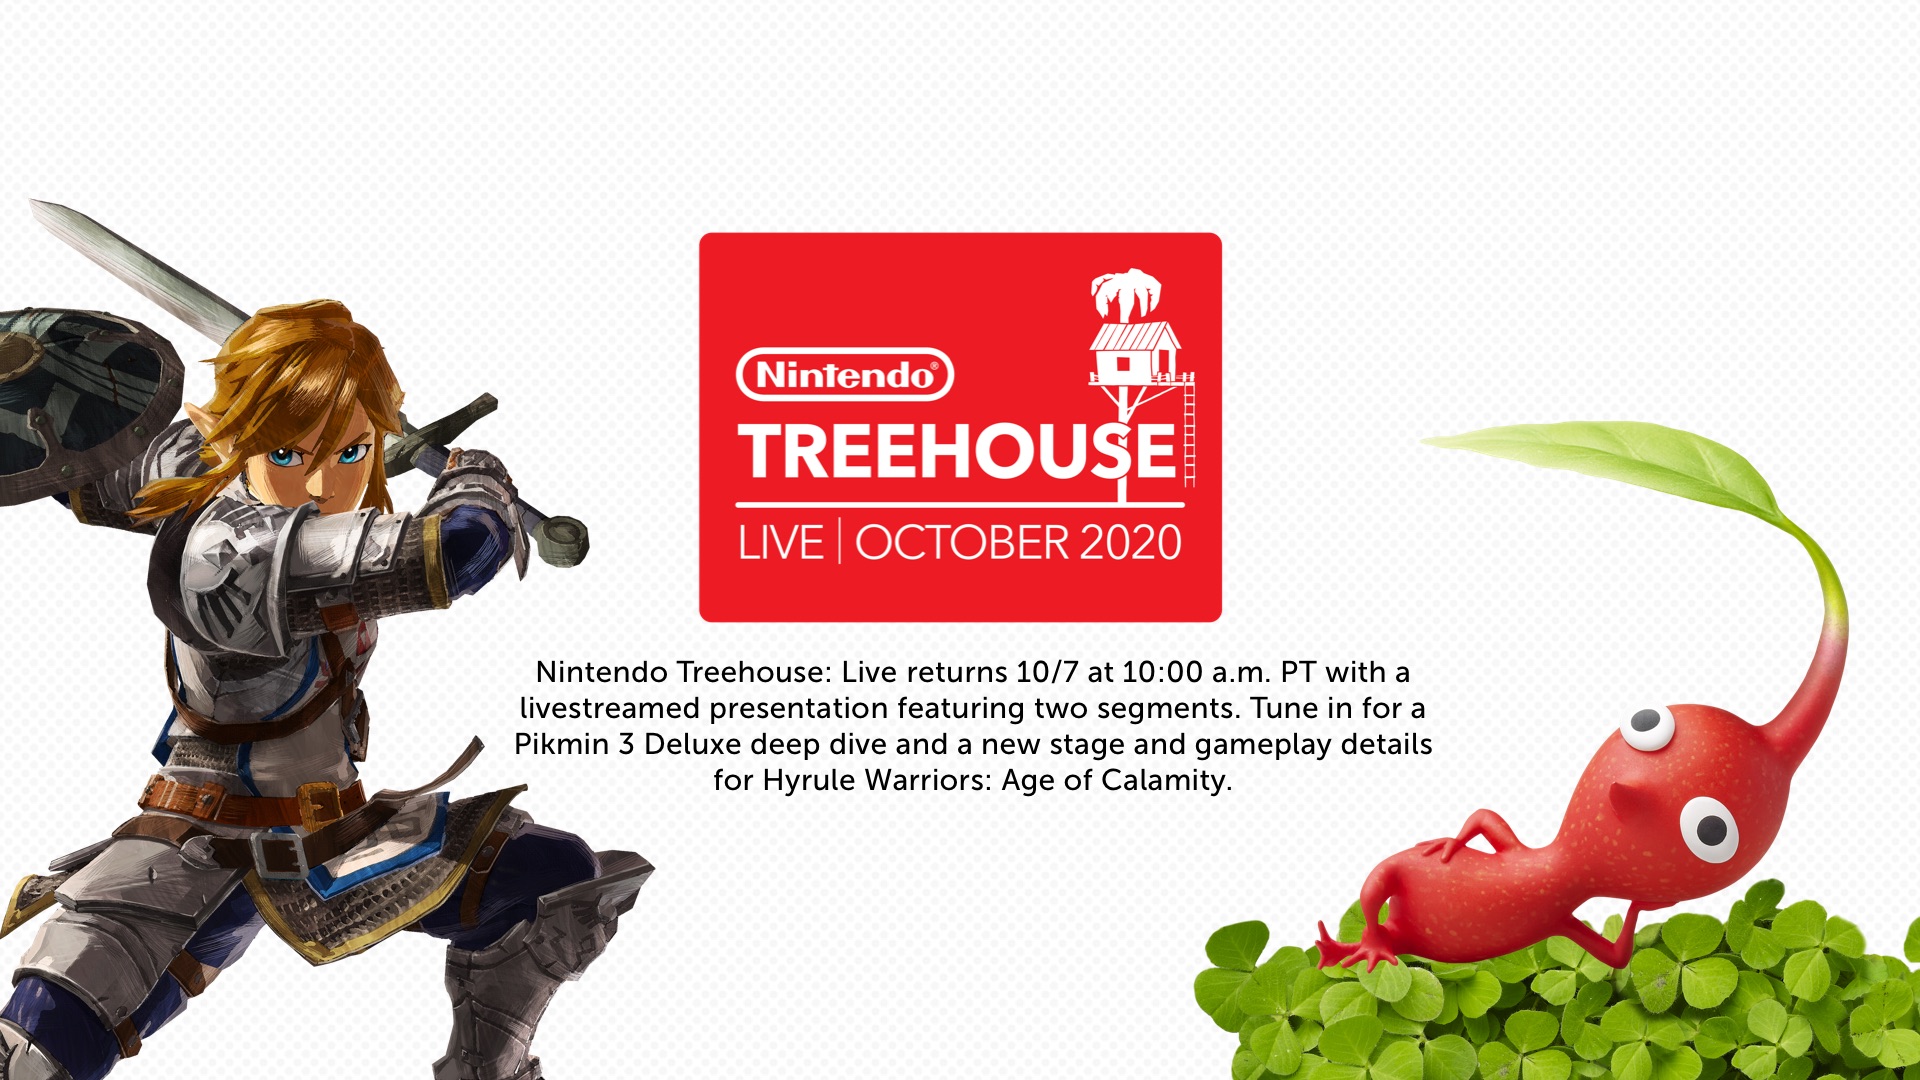 Nintendo Treehouse Livestream Set for October 7, Will Focus on Pikmin 3 Deluxe and Hyrule Warriors: Age of Calamity